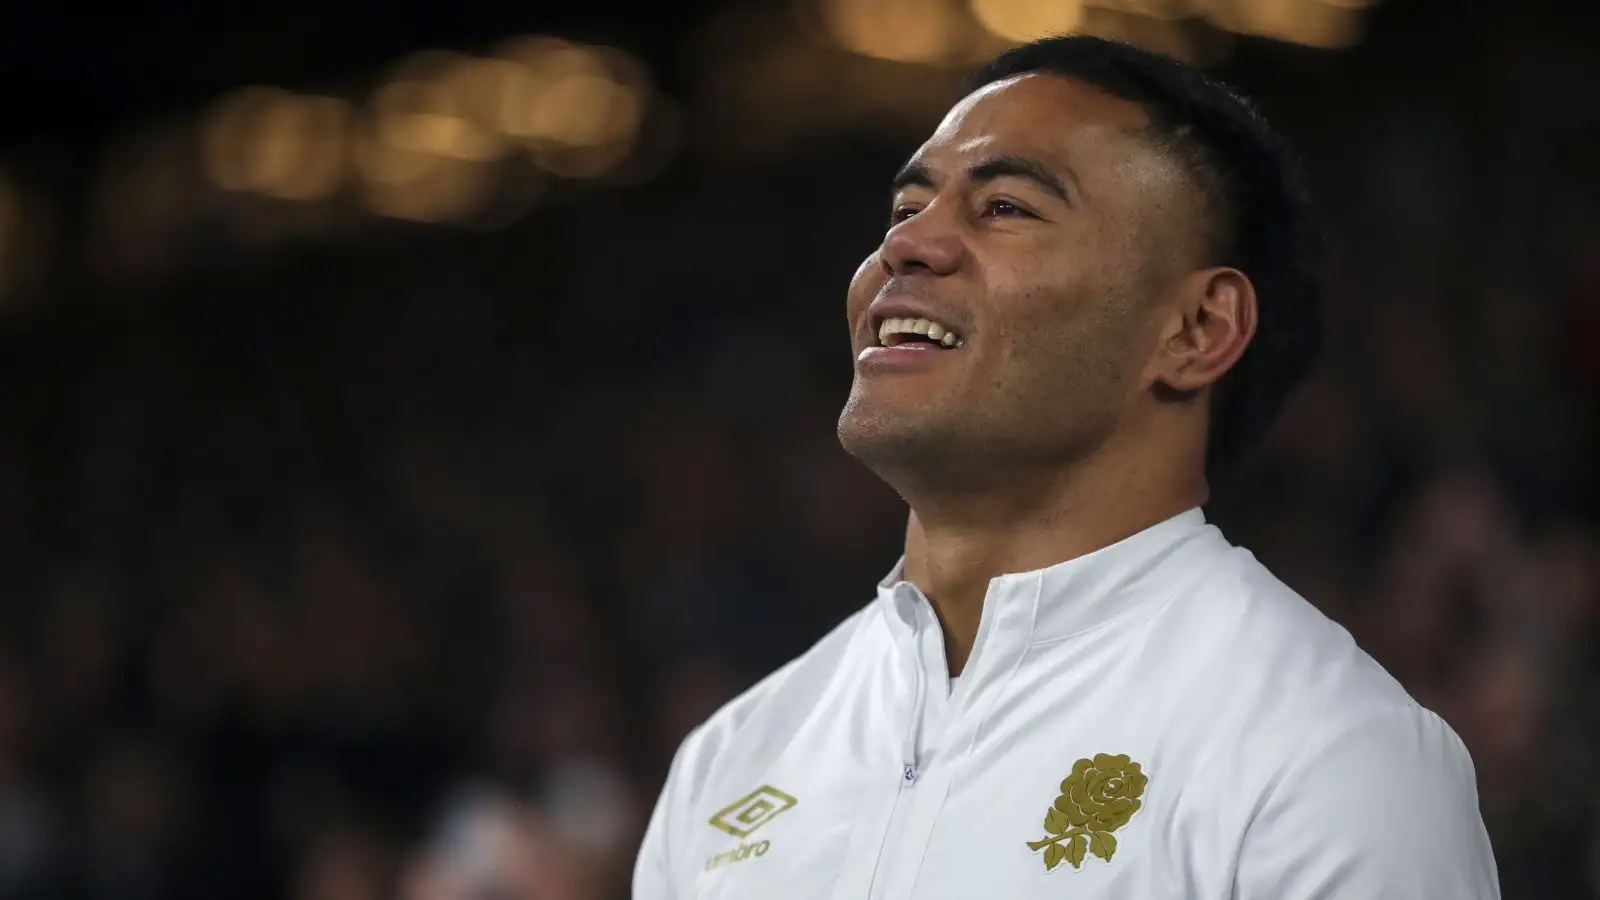 premiership England centre Manu Tuilagi has rejected overseas interest to sign a new one-year contract with Sale Sharks.